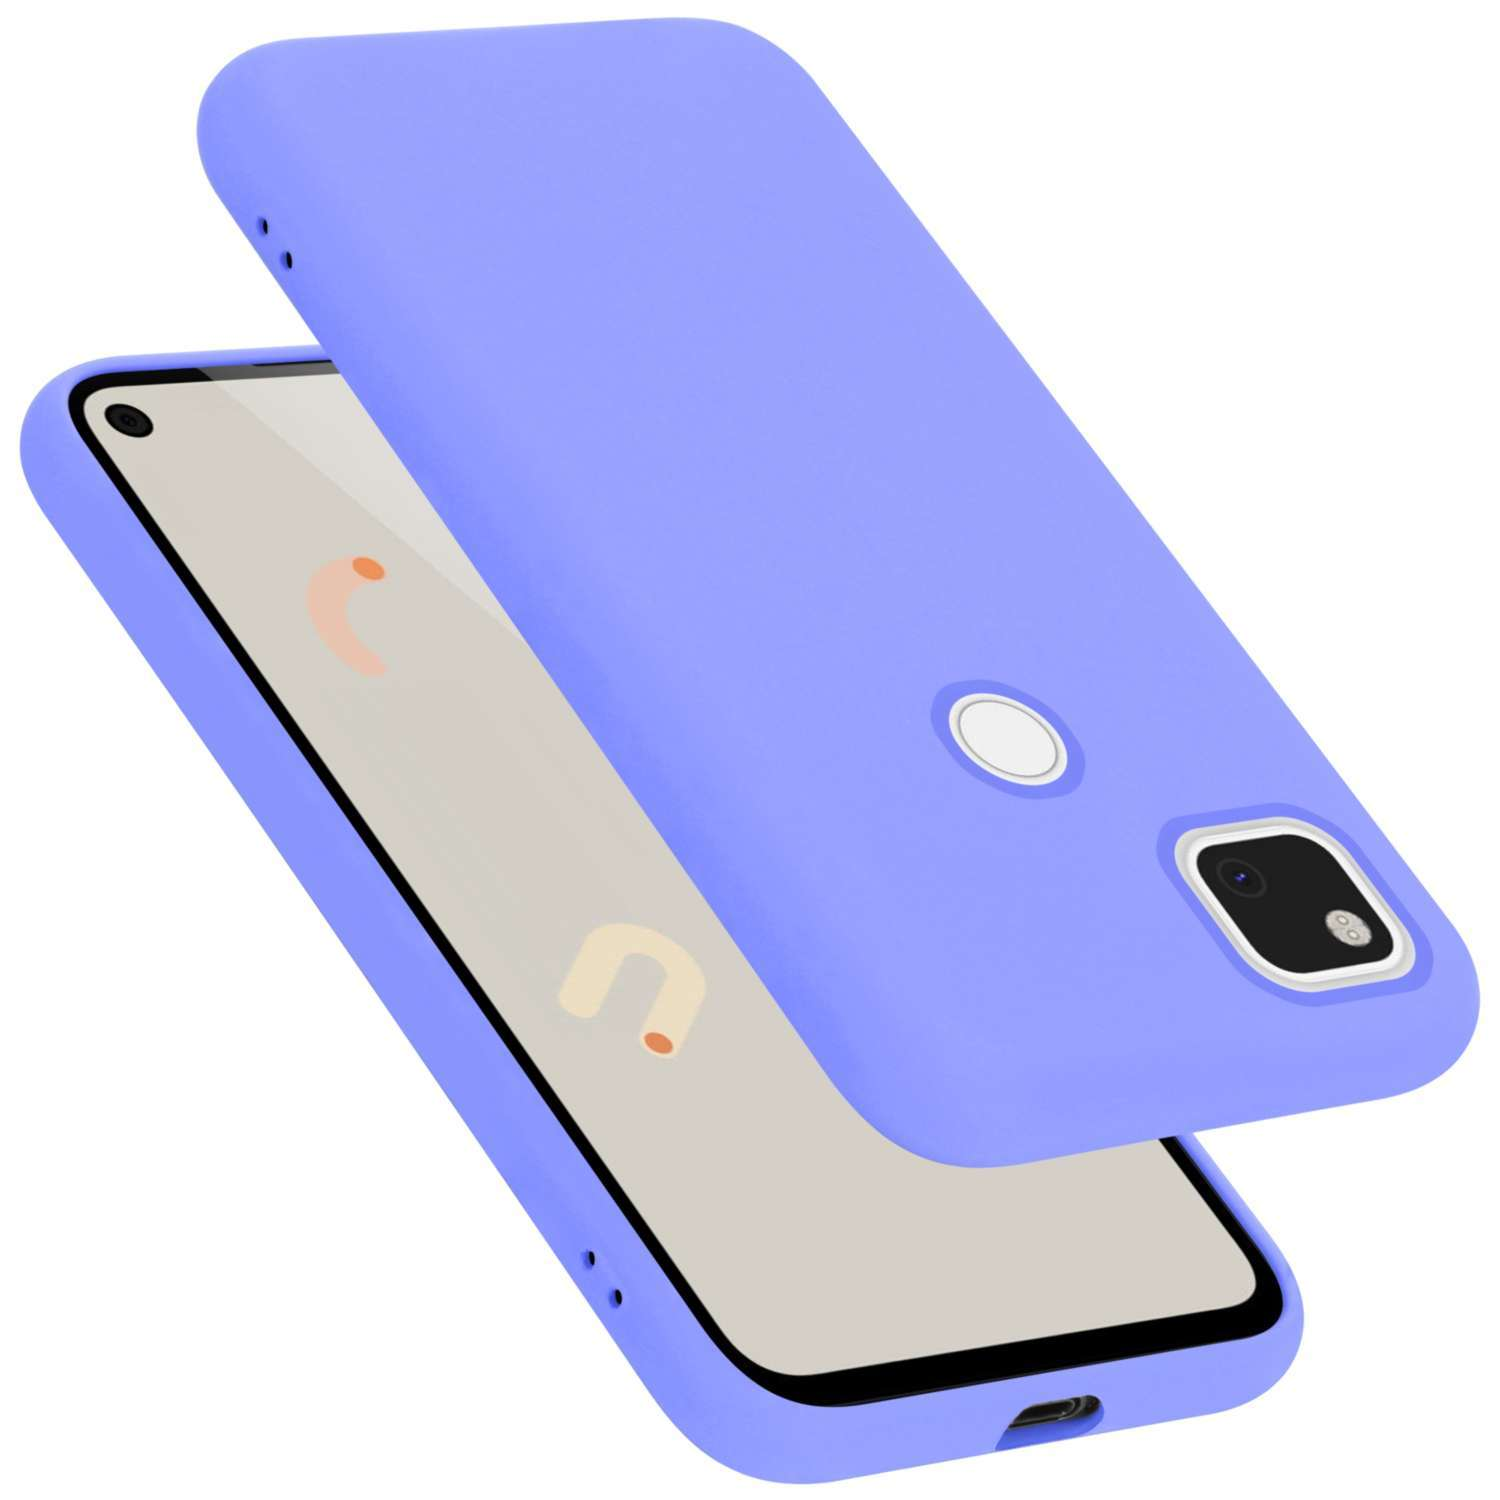 Style, 5G, Liquid 4A LIQUID CADORABO Backcover, Case LILA HELL PIXEL Silicone Hülle im Google,